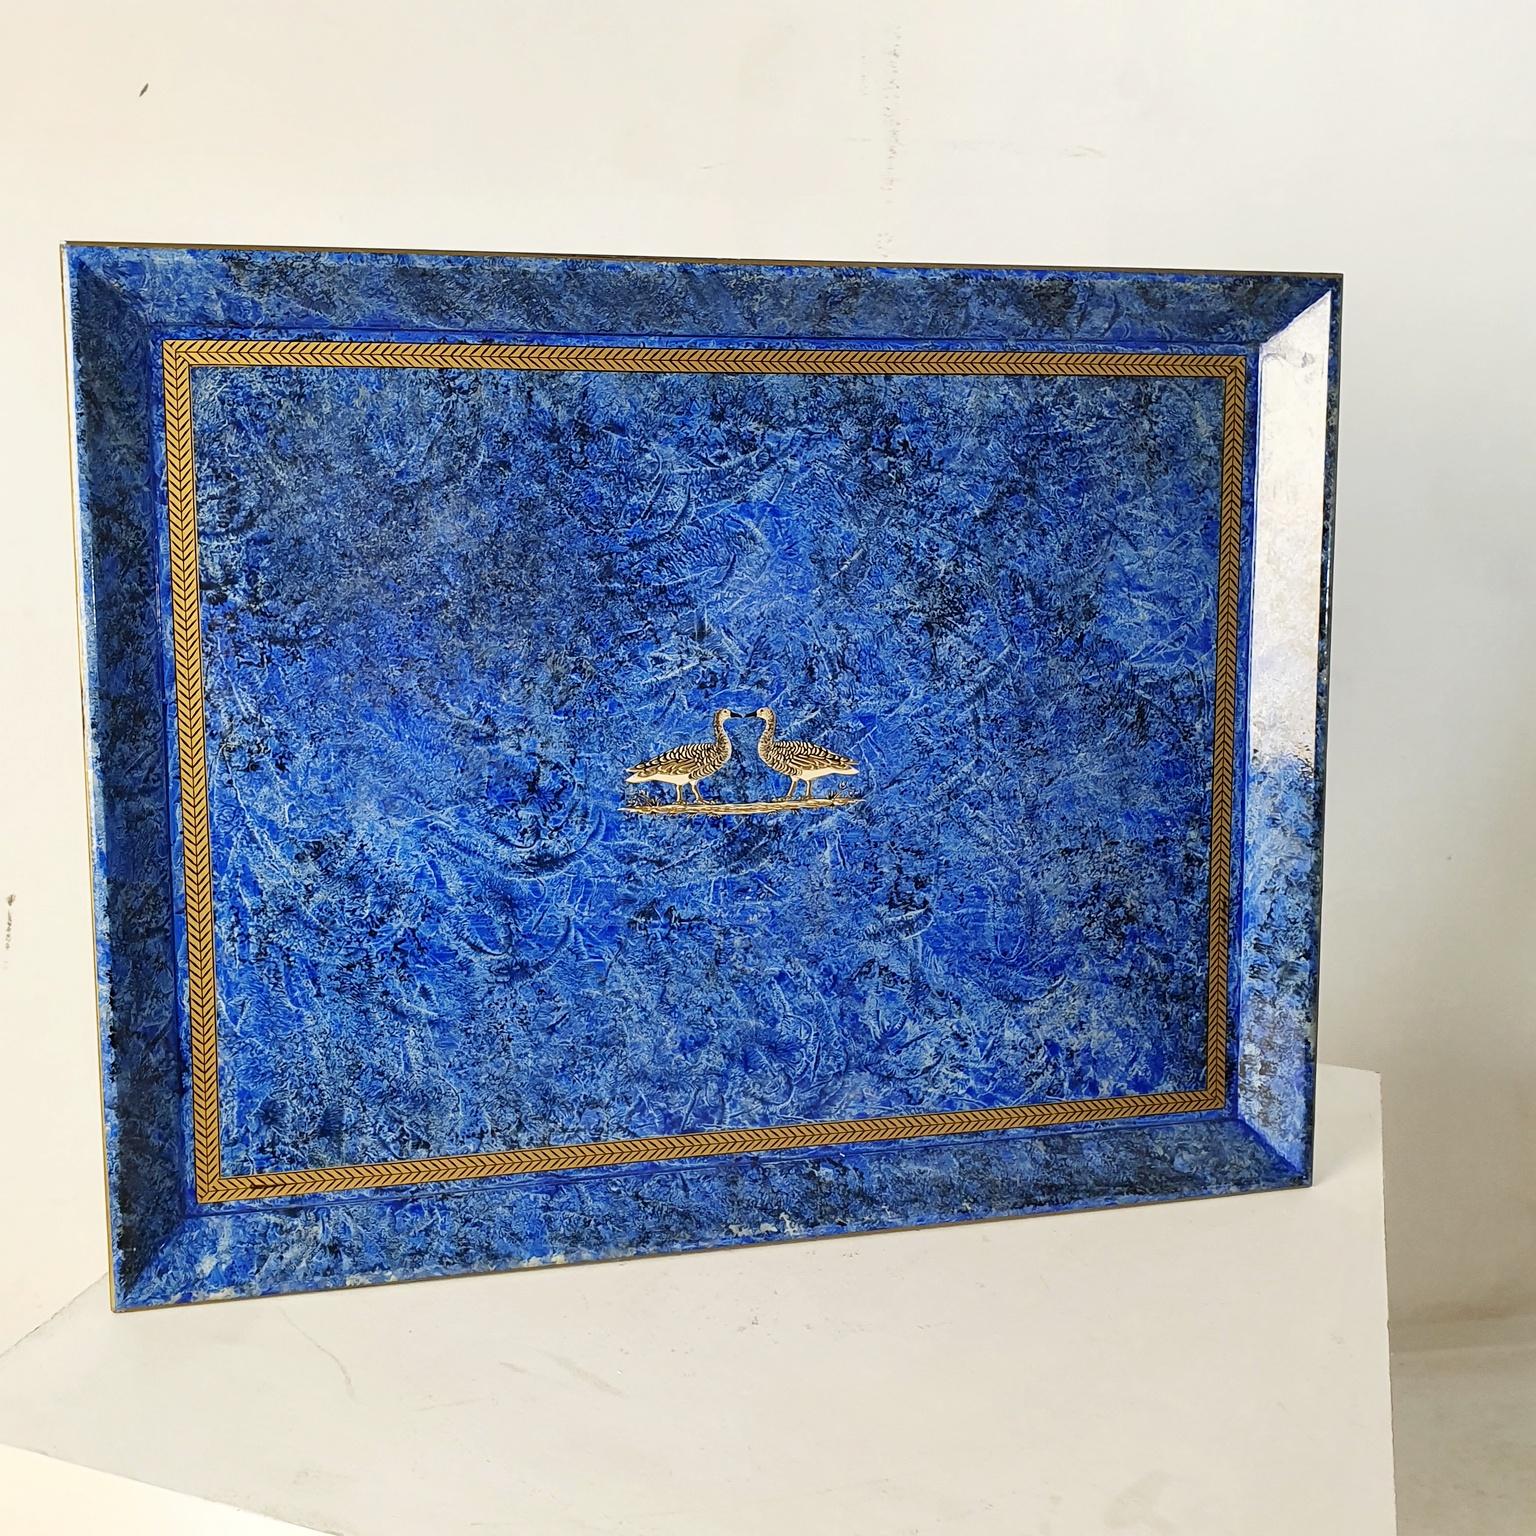 A large rectangular handcrafted serving tray in blue with a border in gold and center featuring a pair of geese. In excellent unused condition.